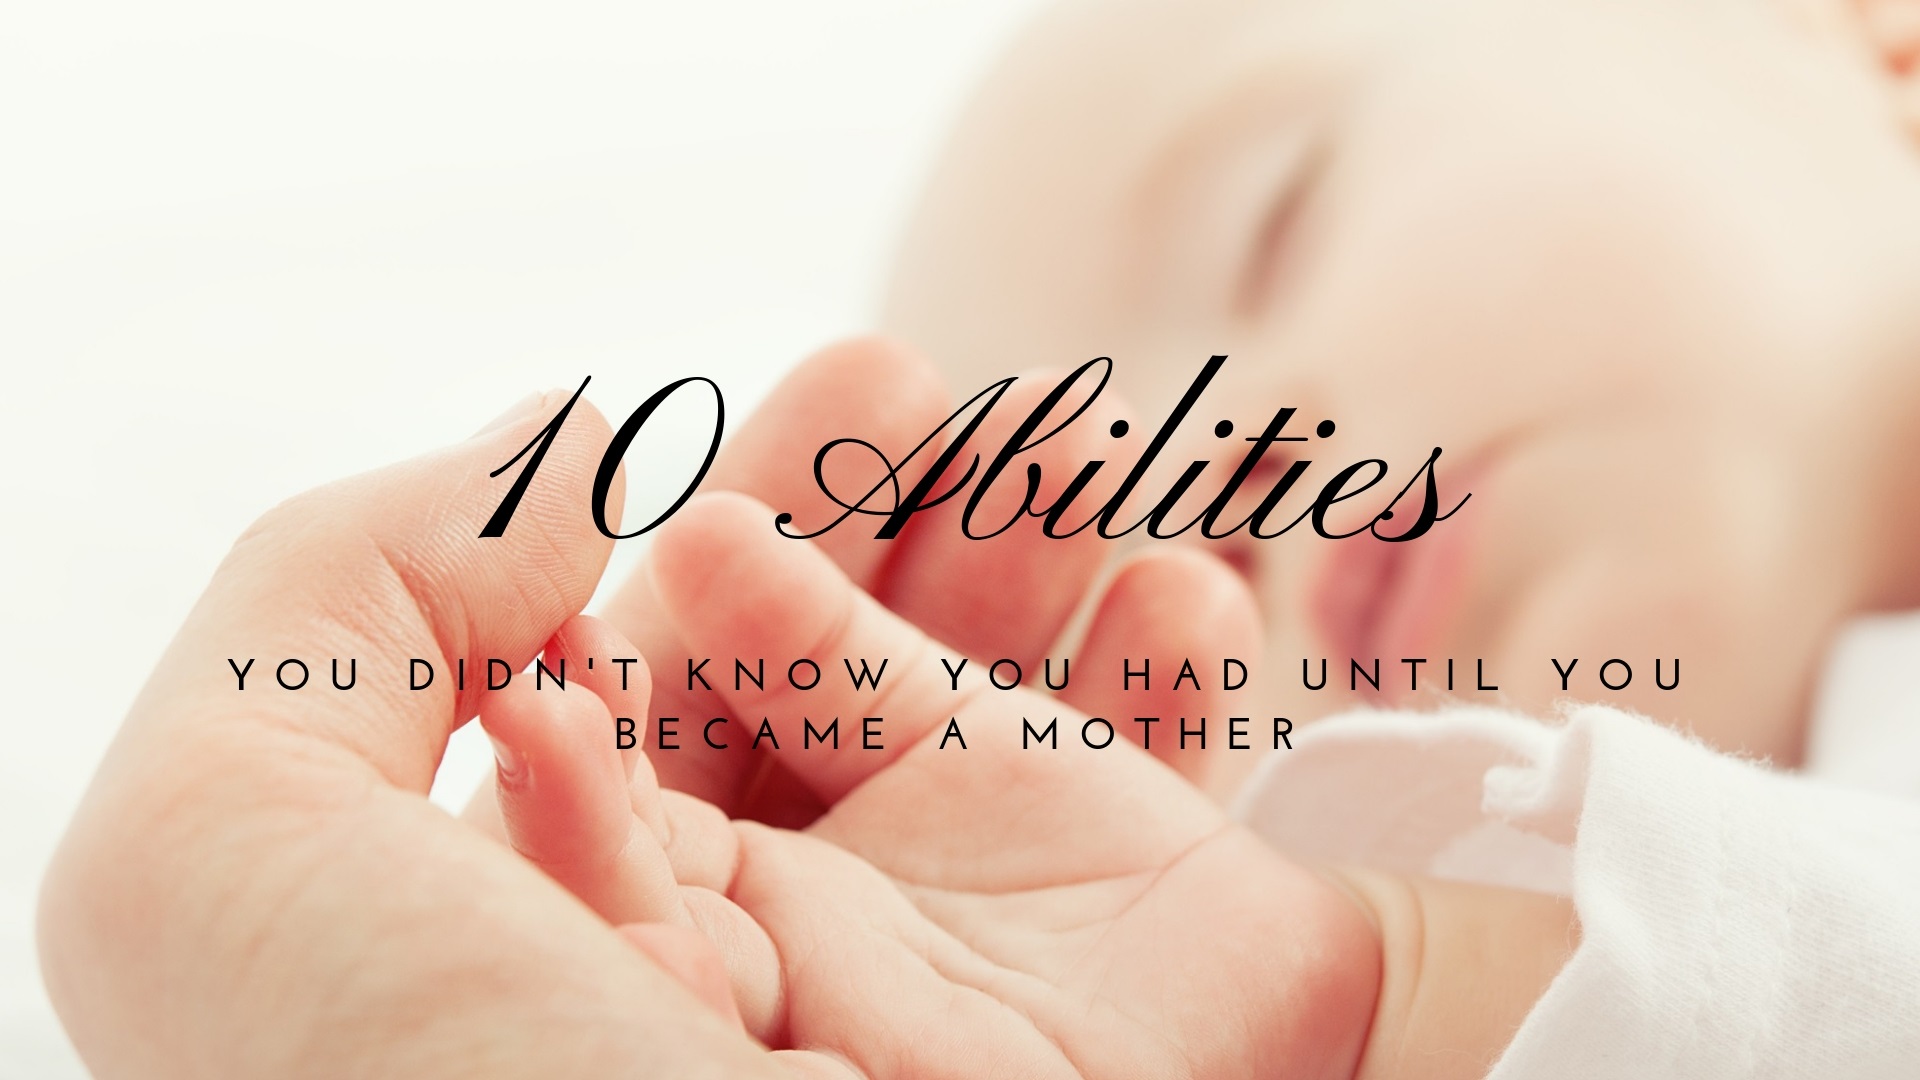 10 abilities you didn't know you had until you became a mother